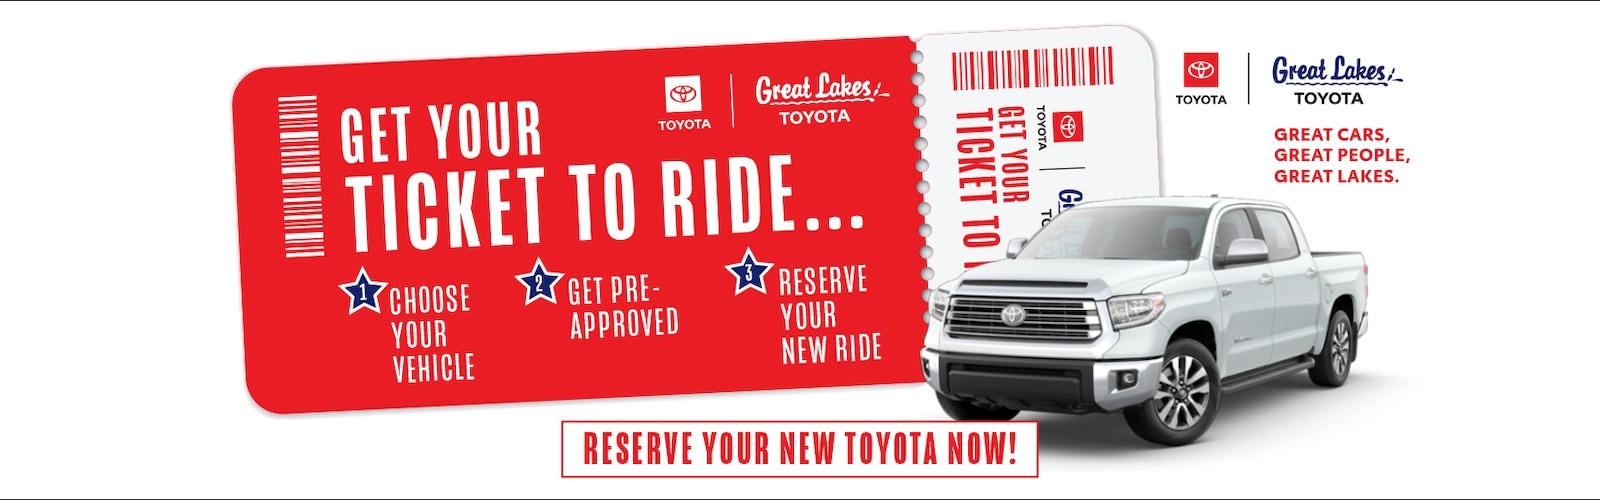 Great Lakes Toyota Findlay OH